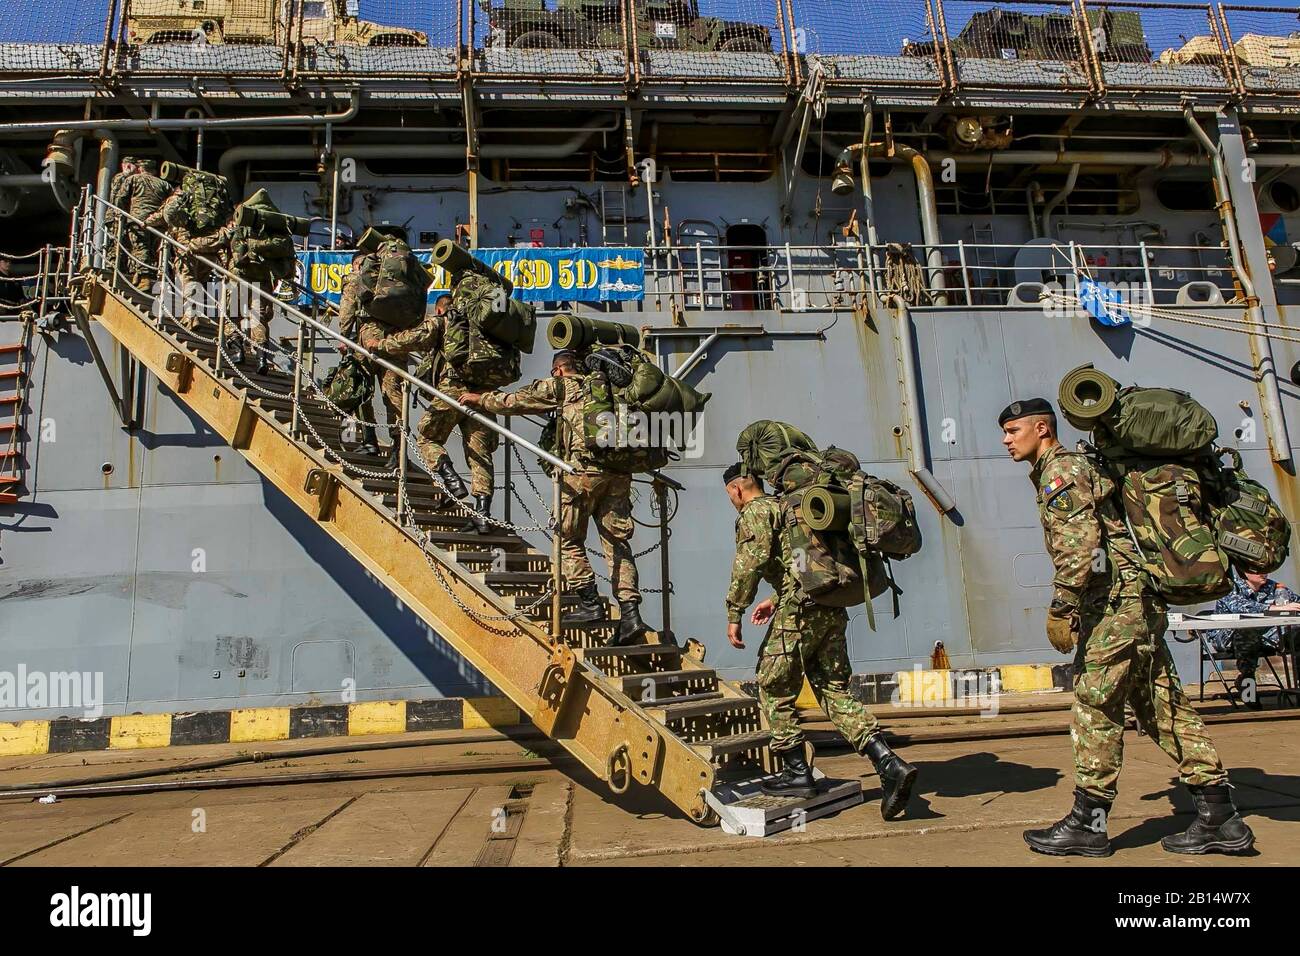 Members of the Romanian 307th Naval Infantry Battalion embark the Harpers Ferry-class dock landing ship USS Oak Hill (LSD 51) to begin training together with U.S. Marines assigned to the 26th Marine Expeditionary Unit (MEU) embarked on the ship as part of exercise Baltic Operations (BALTOPS) at Klaipeda, Lithuania, June 2, 2018. BALTOPS is an annual, multinational exercise designed to enhance interoperability and demonstrate NATO and partner force resolve to defend the Baltic region. (U.S. Marine Corps photo by Staff Sgt. Dengrier M. Baez) Stock Photo